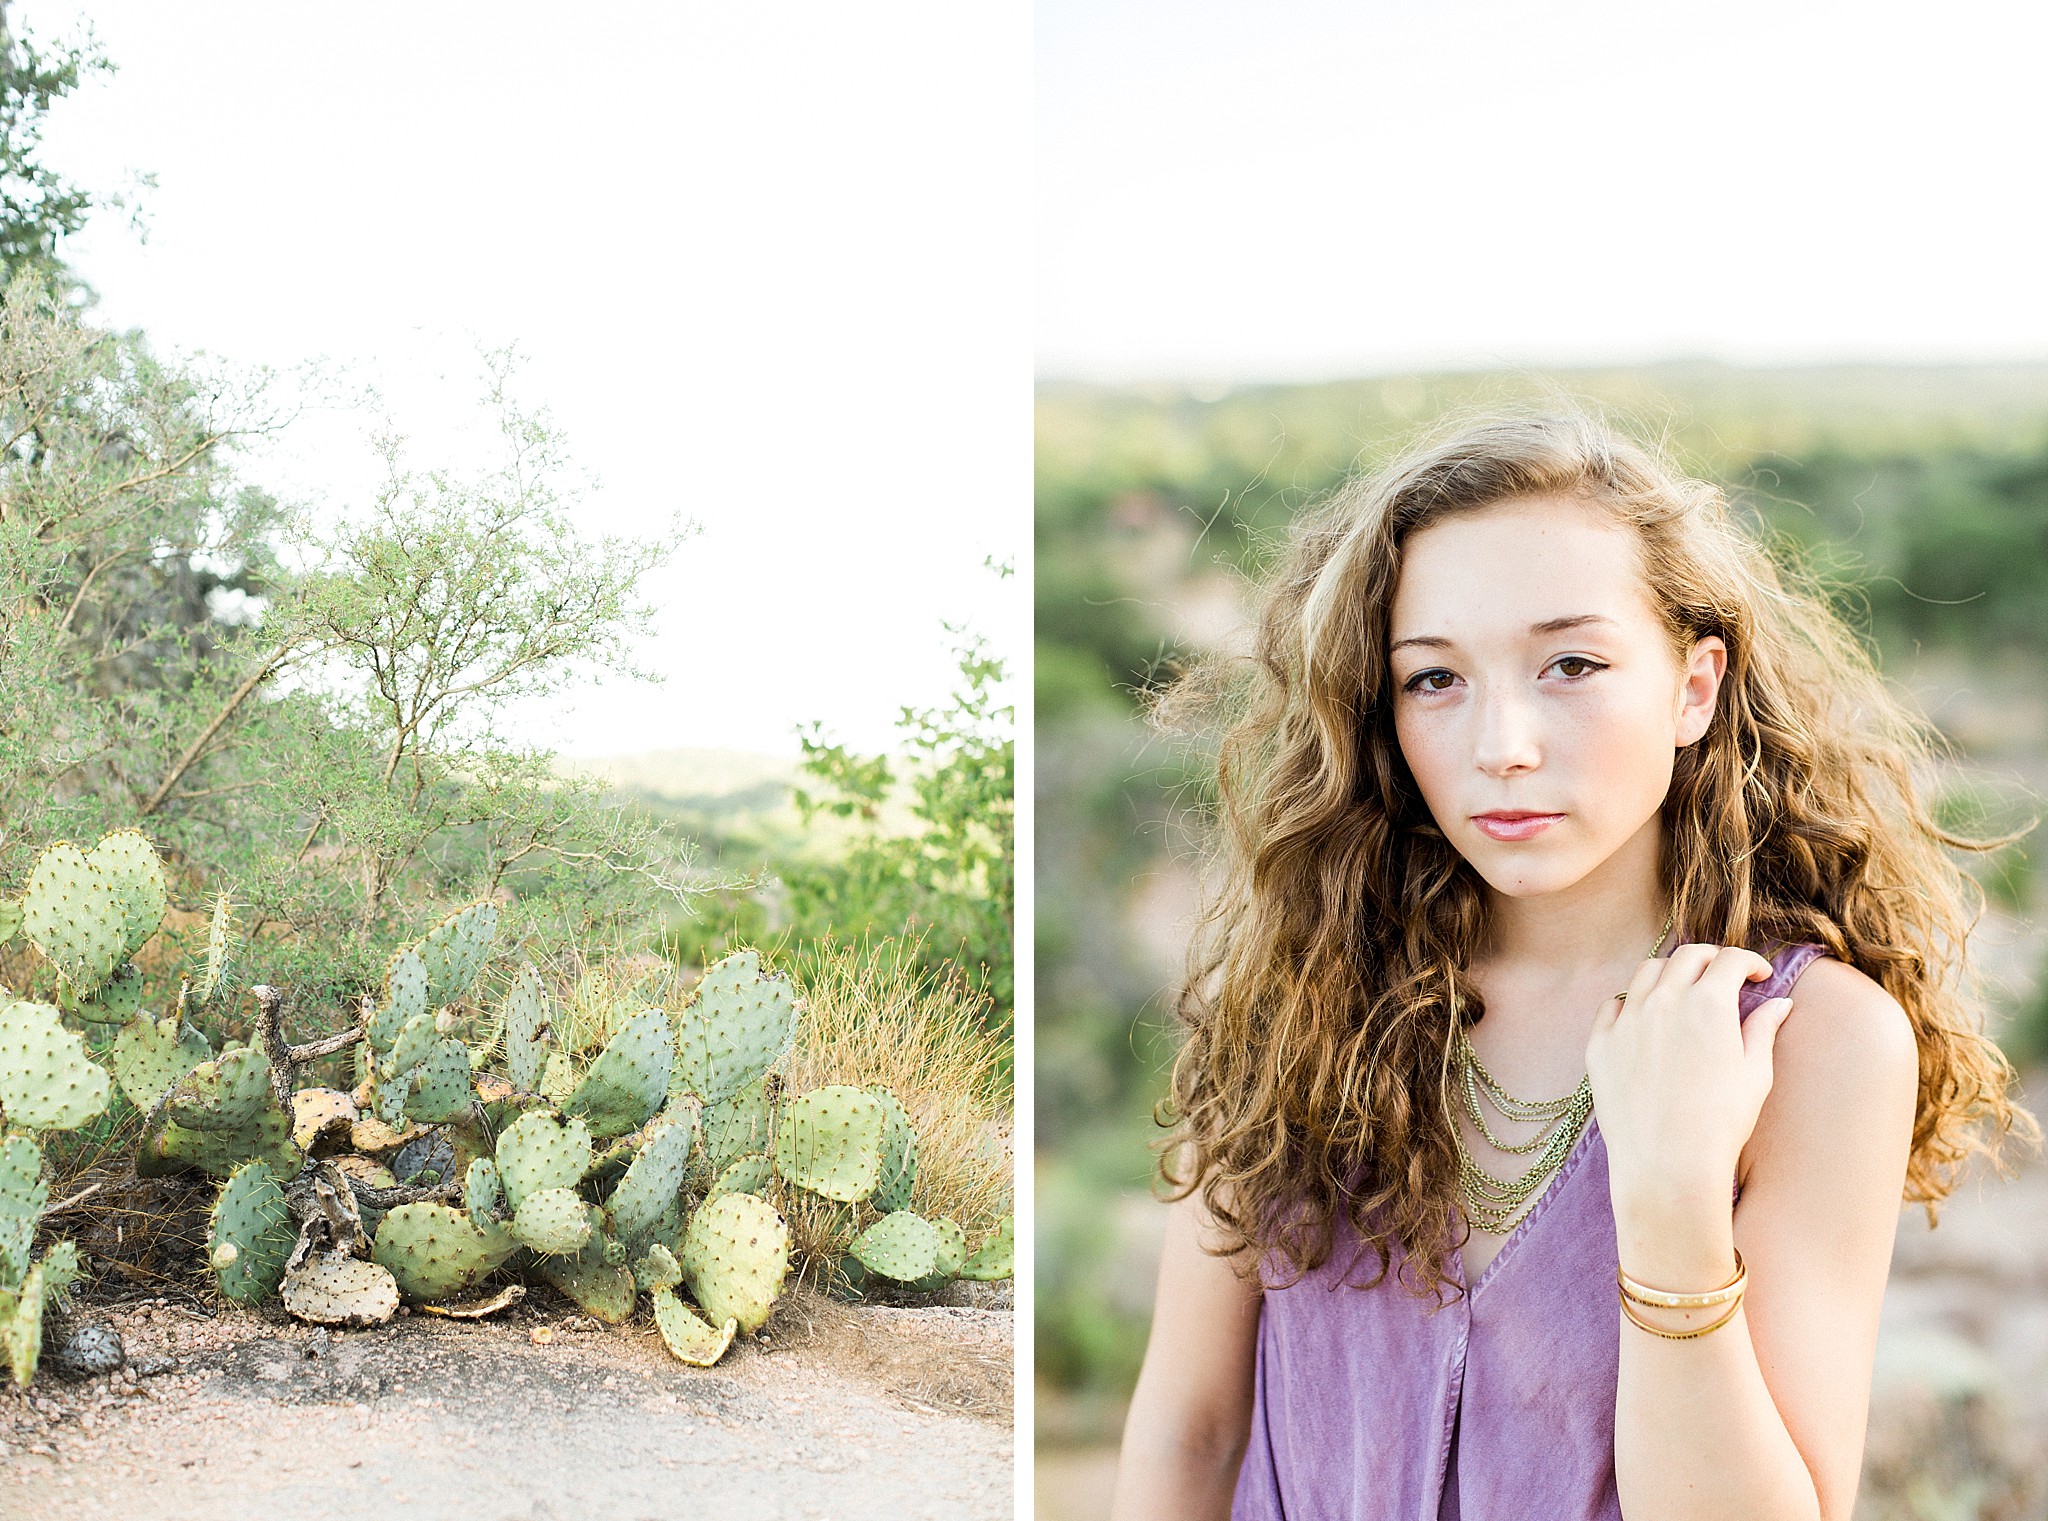 Destination Portrait and Senior Photography at The Enchanted Rock by Rachael Osborn © www.rachaelosborn.com - Chicago & Destination Wedding Photographer 